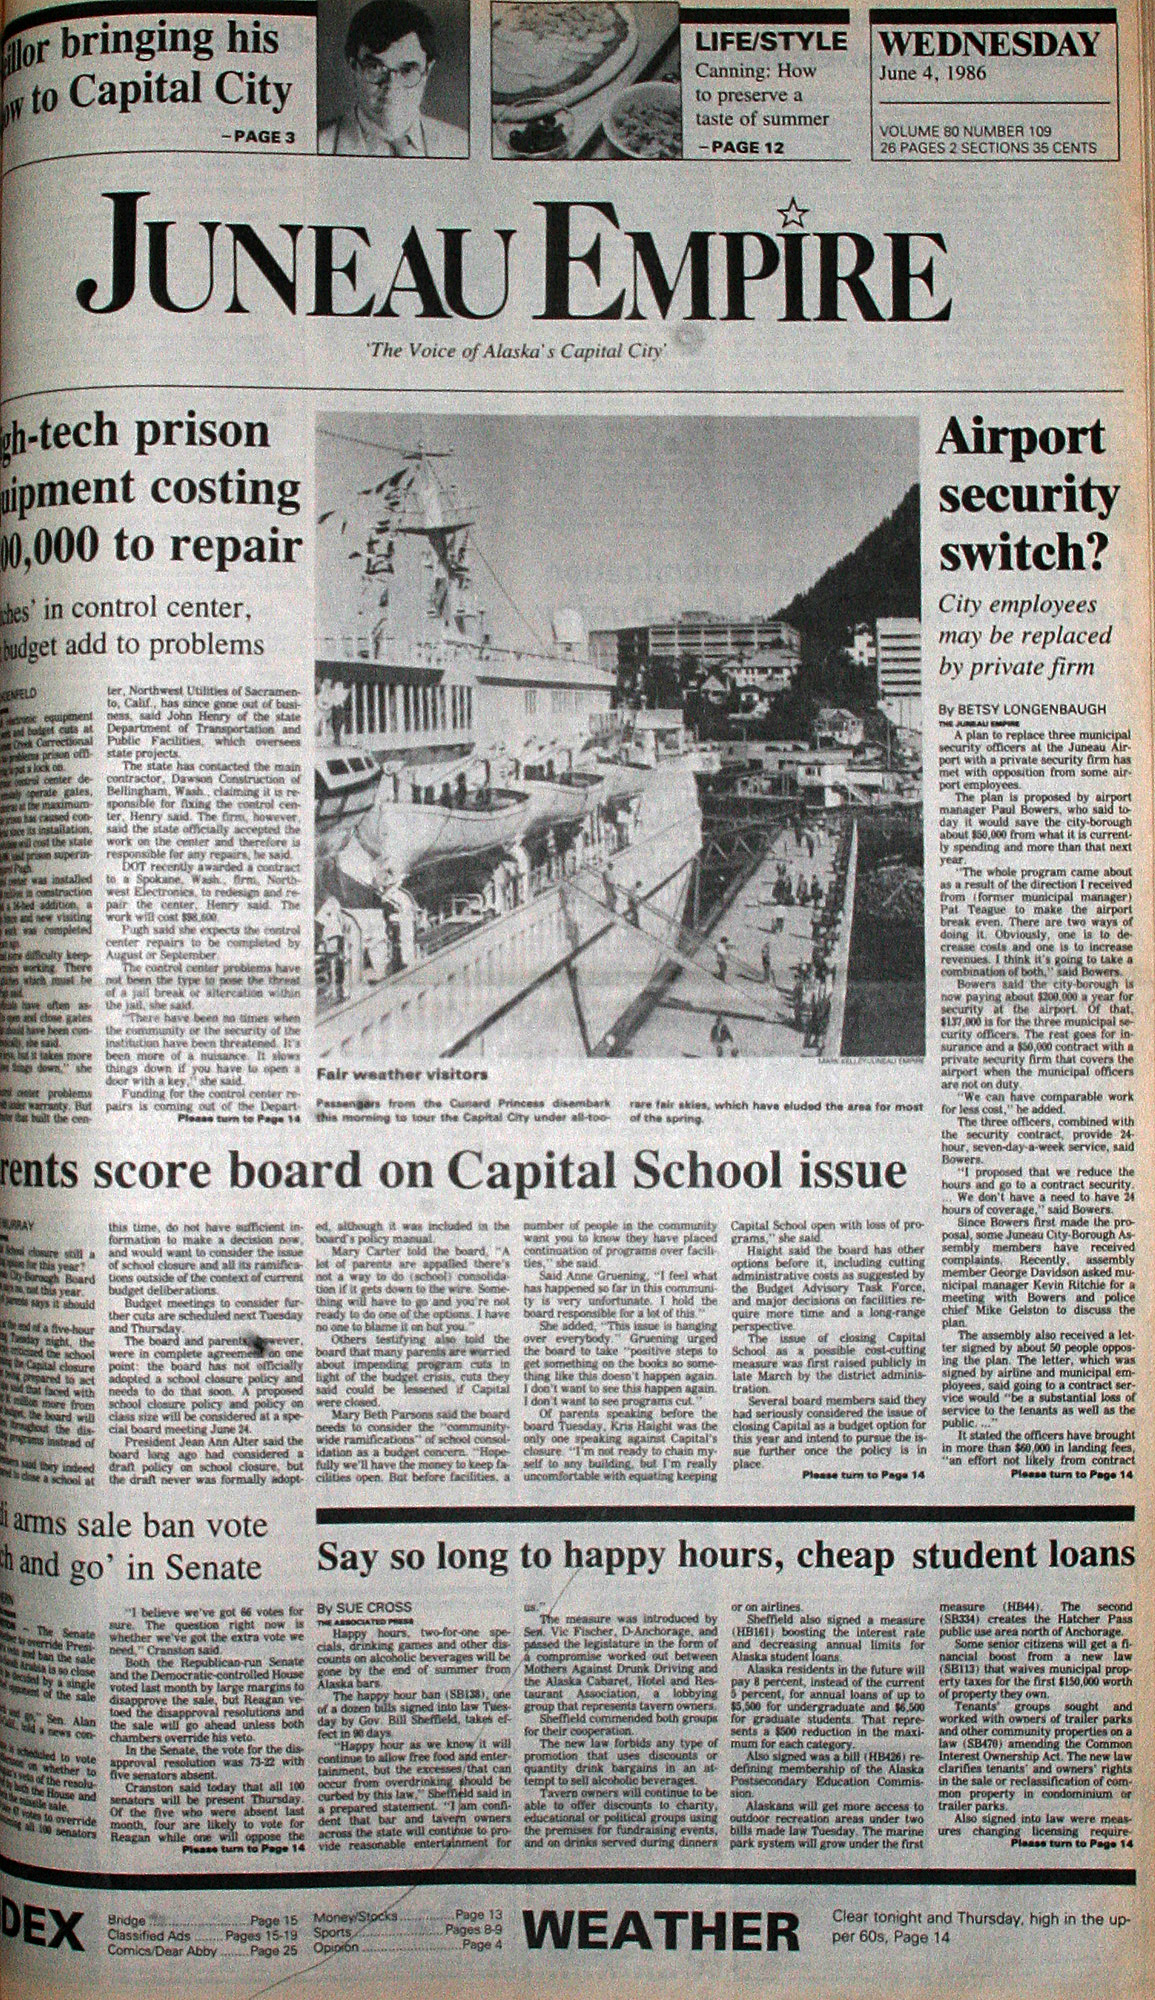 The front page of the Juneau Empire on June 4, 1986